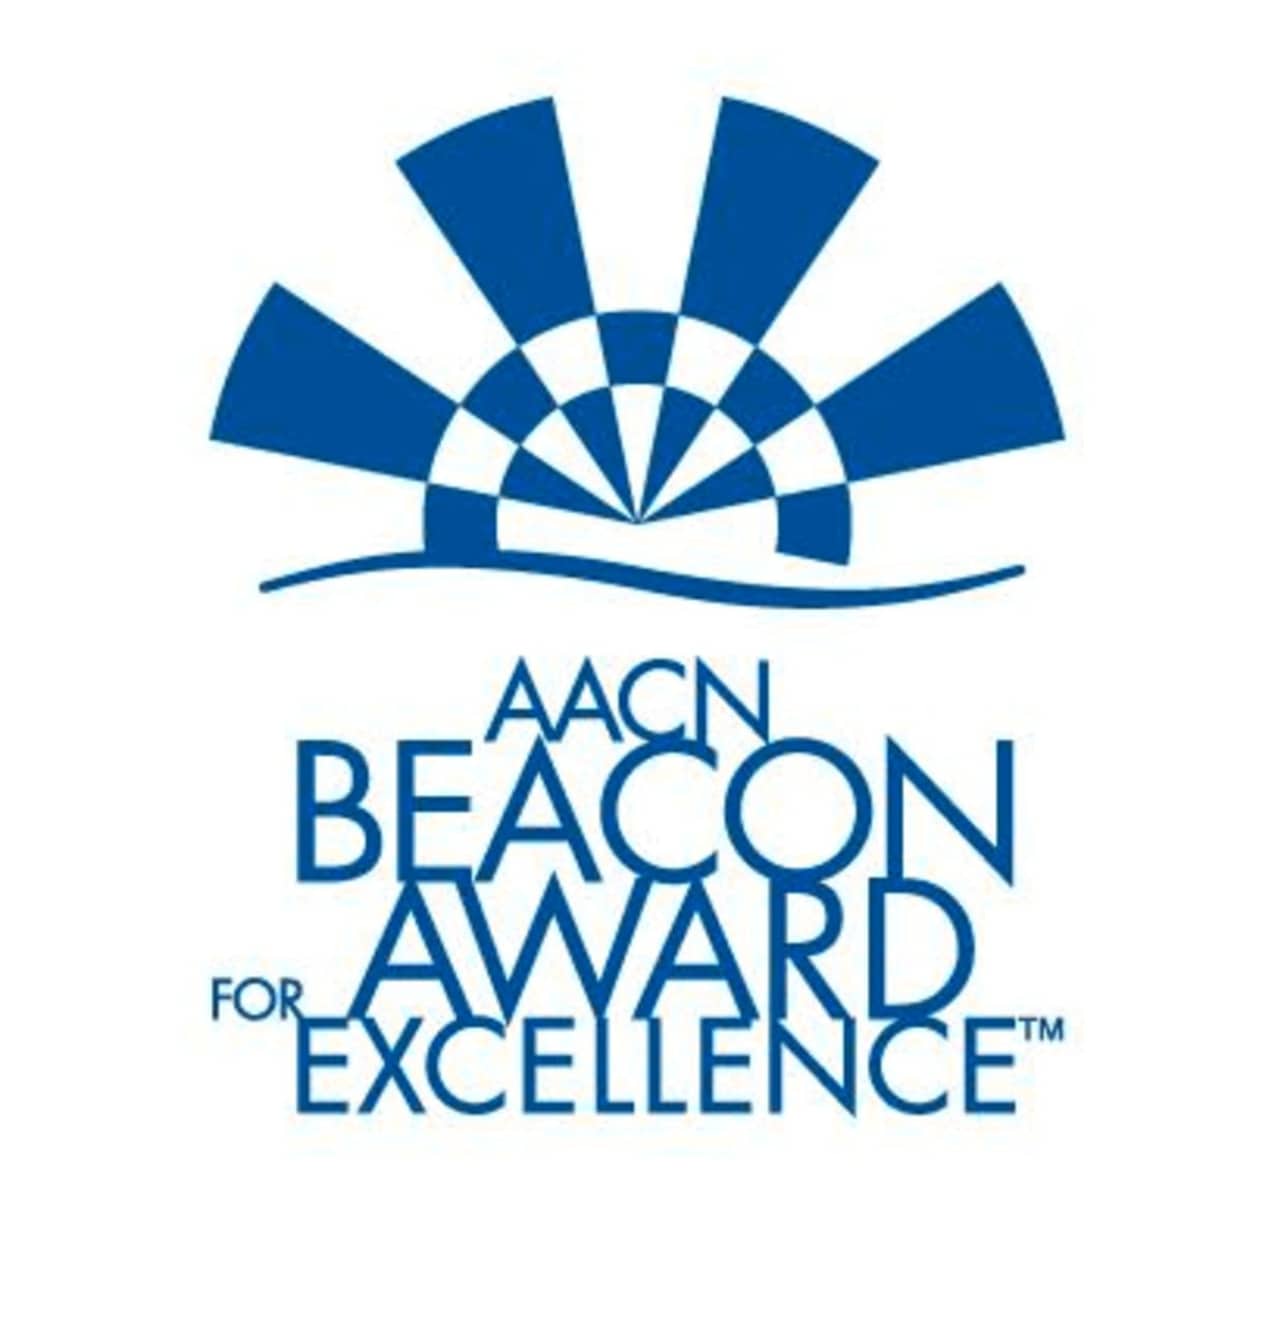 White Plains Hospital has been awarded the Beacon Award for Excellence by the AACN.